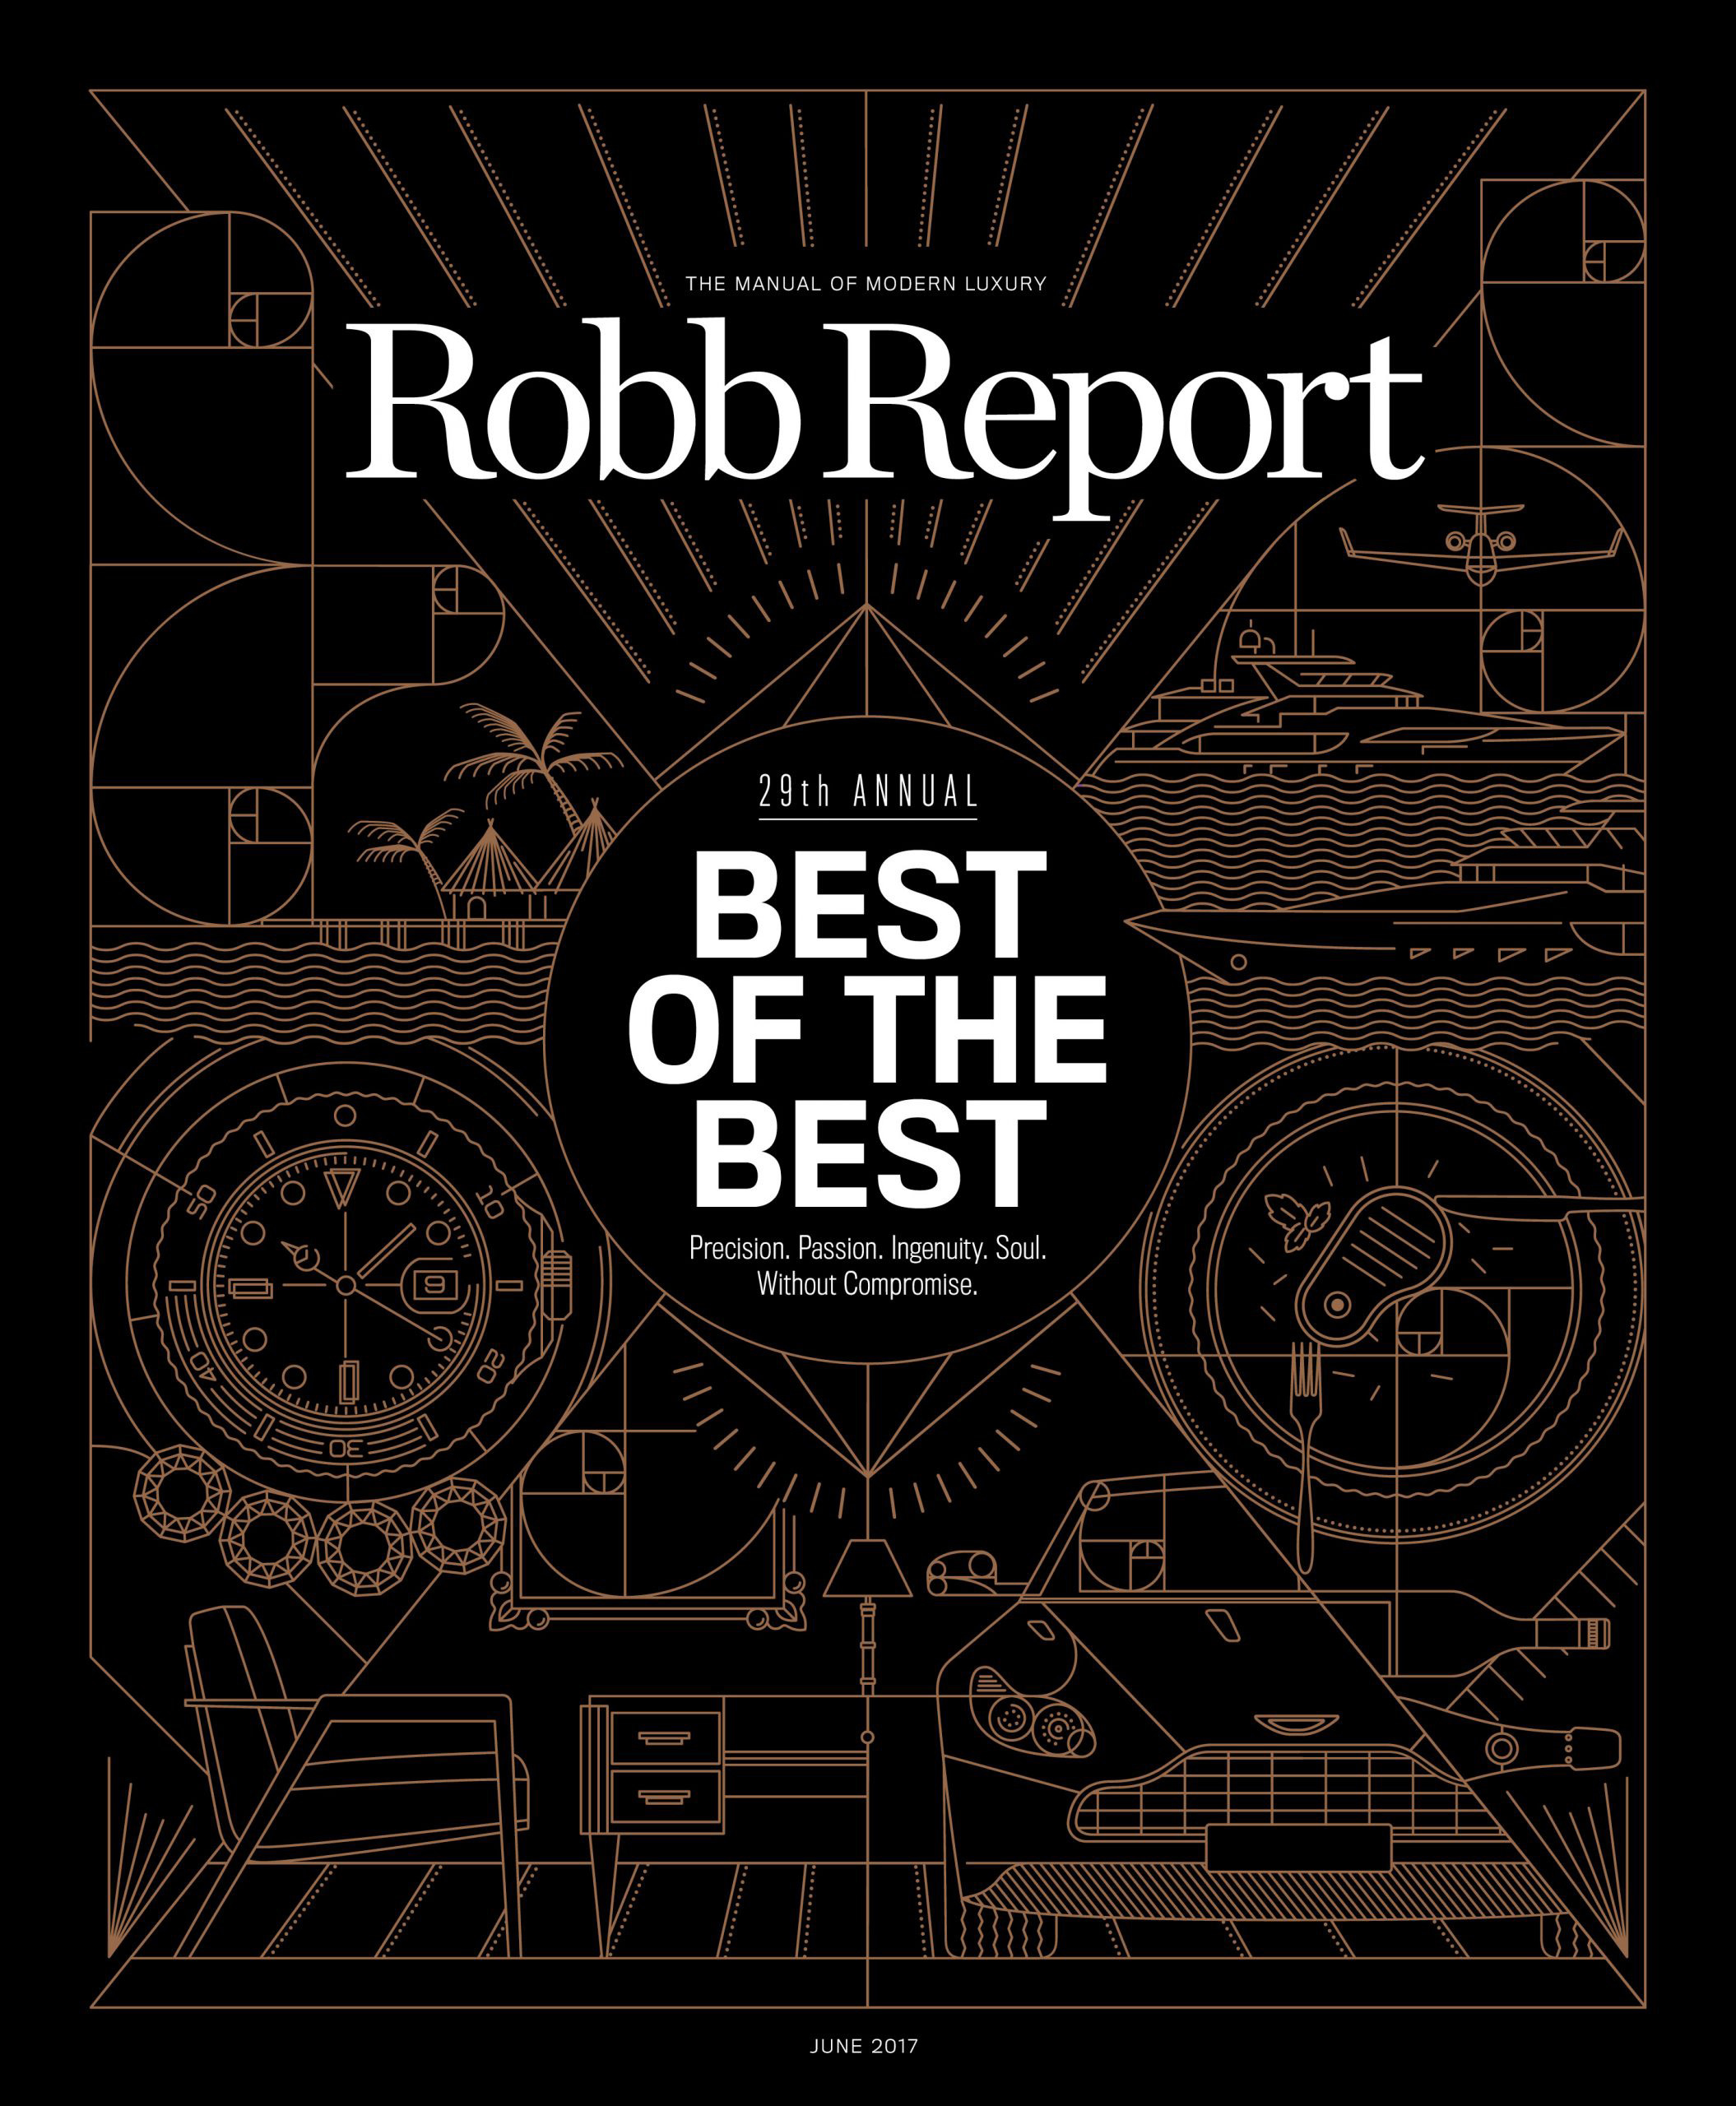 Robb Report Best of the Best 2017